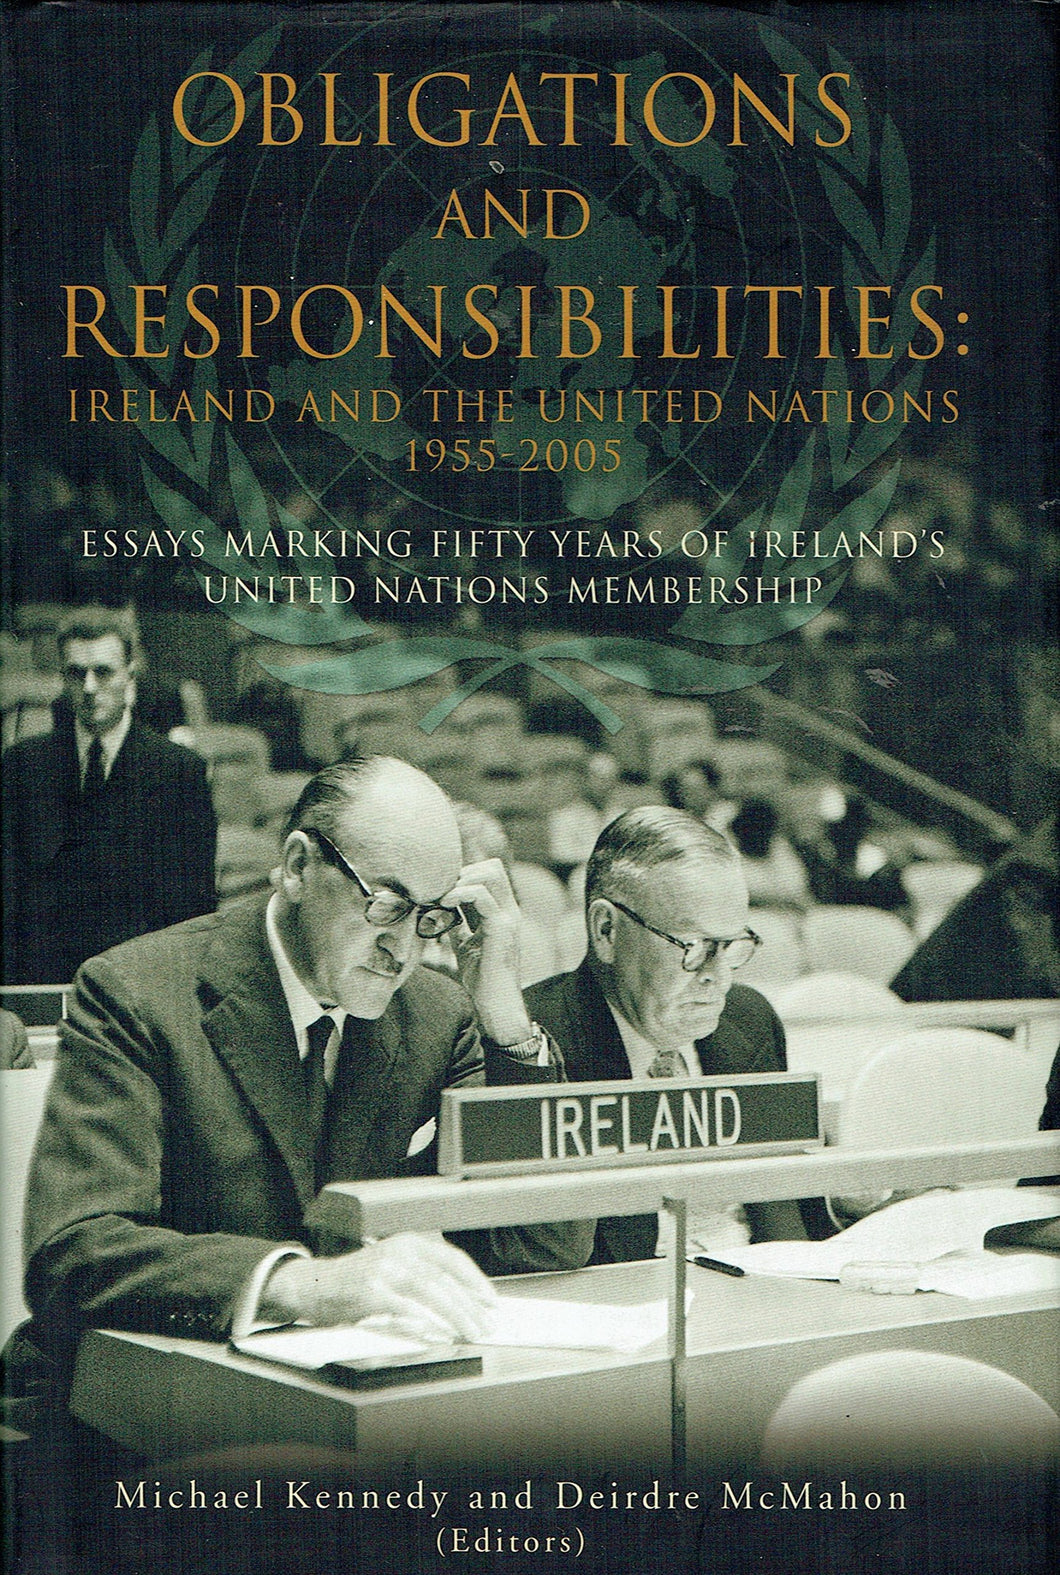 Obligations and Responsibilities: Ireland and the United Nations, 1955-2005: Essays Marking Fifty Years of Ireland's United Nations Membership